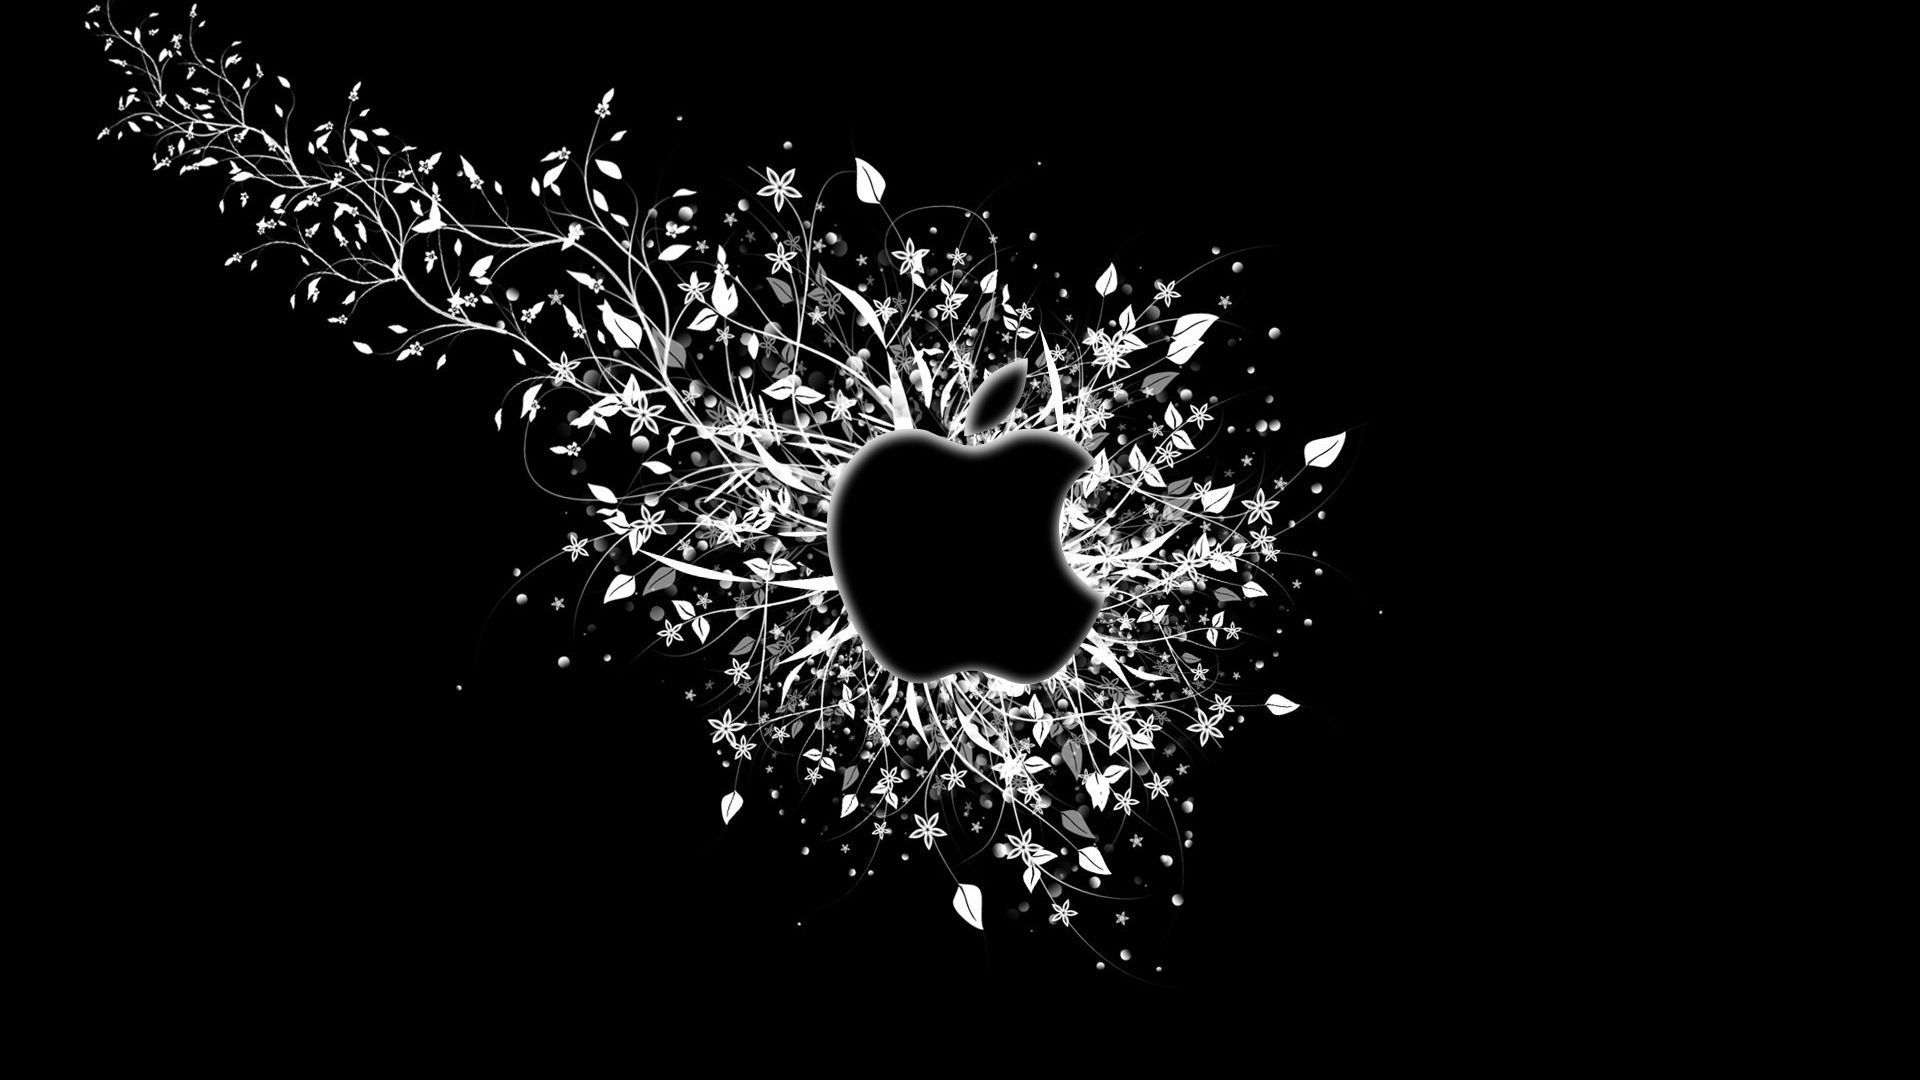 Download Wallpaper 1920x1080 Apple, Mac, Paint, Stains, Splashes ...